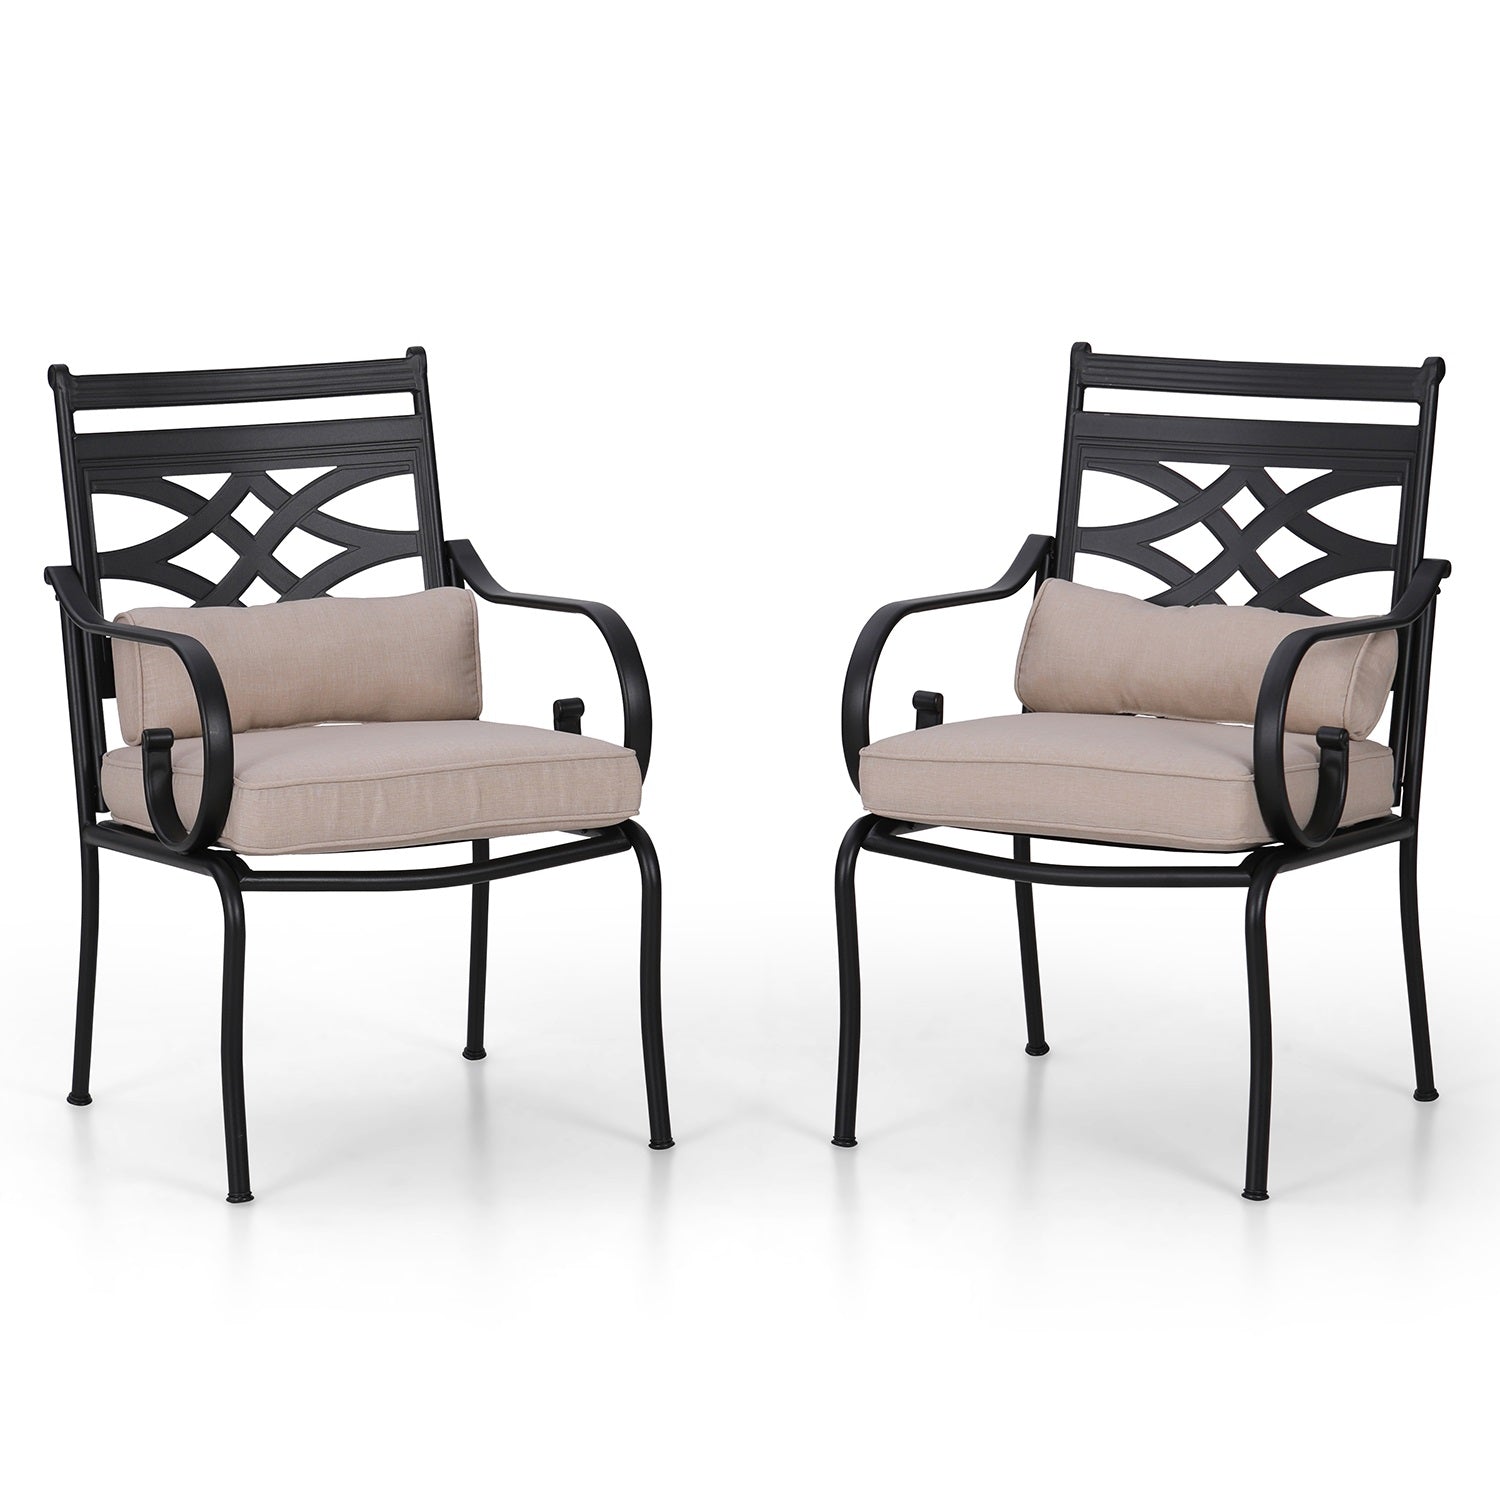 MFSTUDIO 2-Piece Cast Iron Pattern Patio Fixed Dining Chairs with Thick Cushions